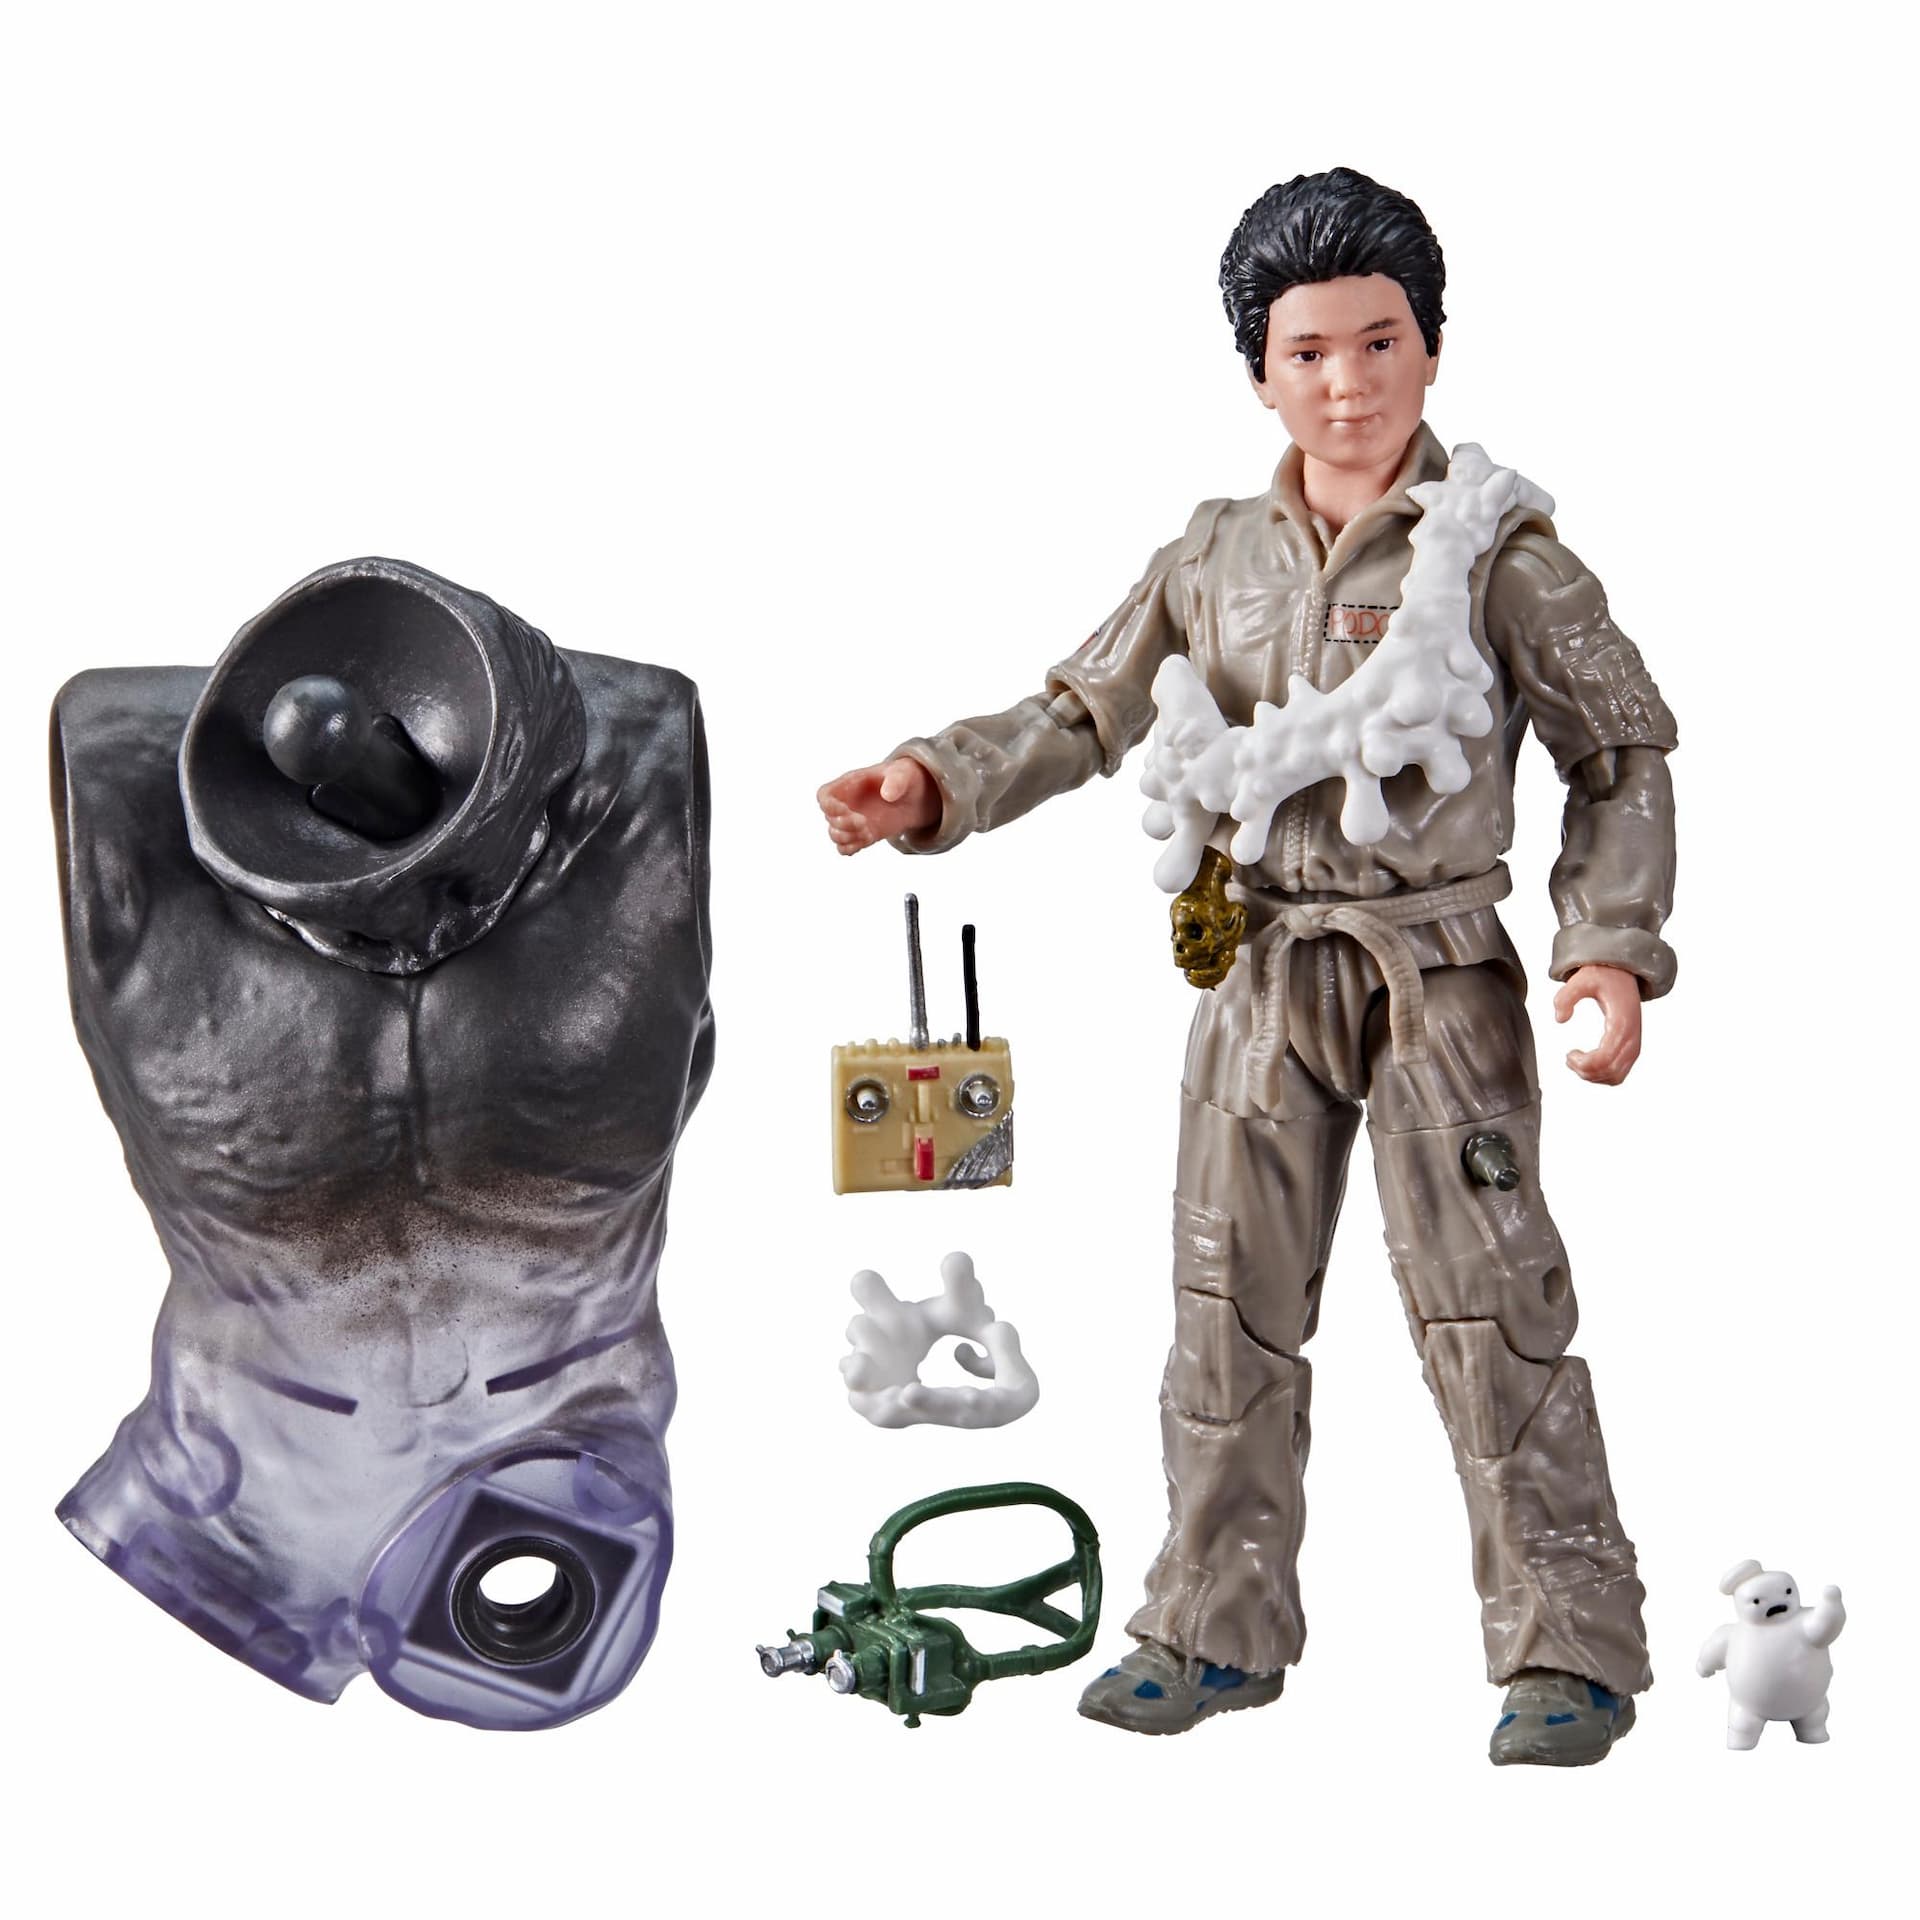 Ghostbusters Plasma Series Podcast Toy 6-Inch-Scale Collectible Ghostbusters: Afterlife Action Figure, Kids Ages 4 and Up